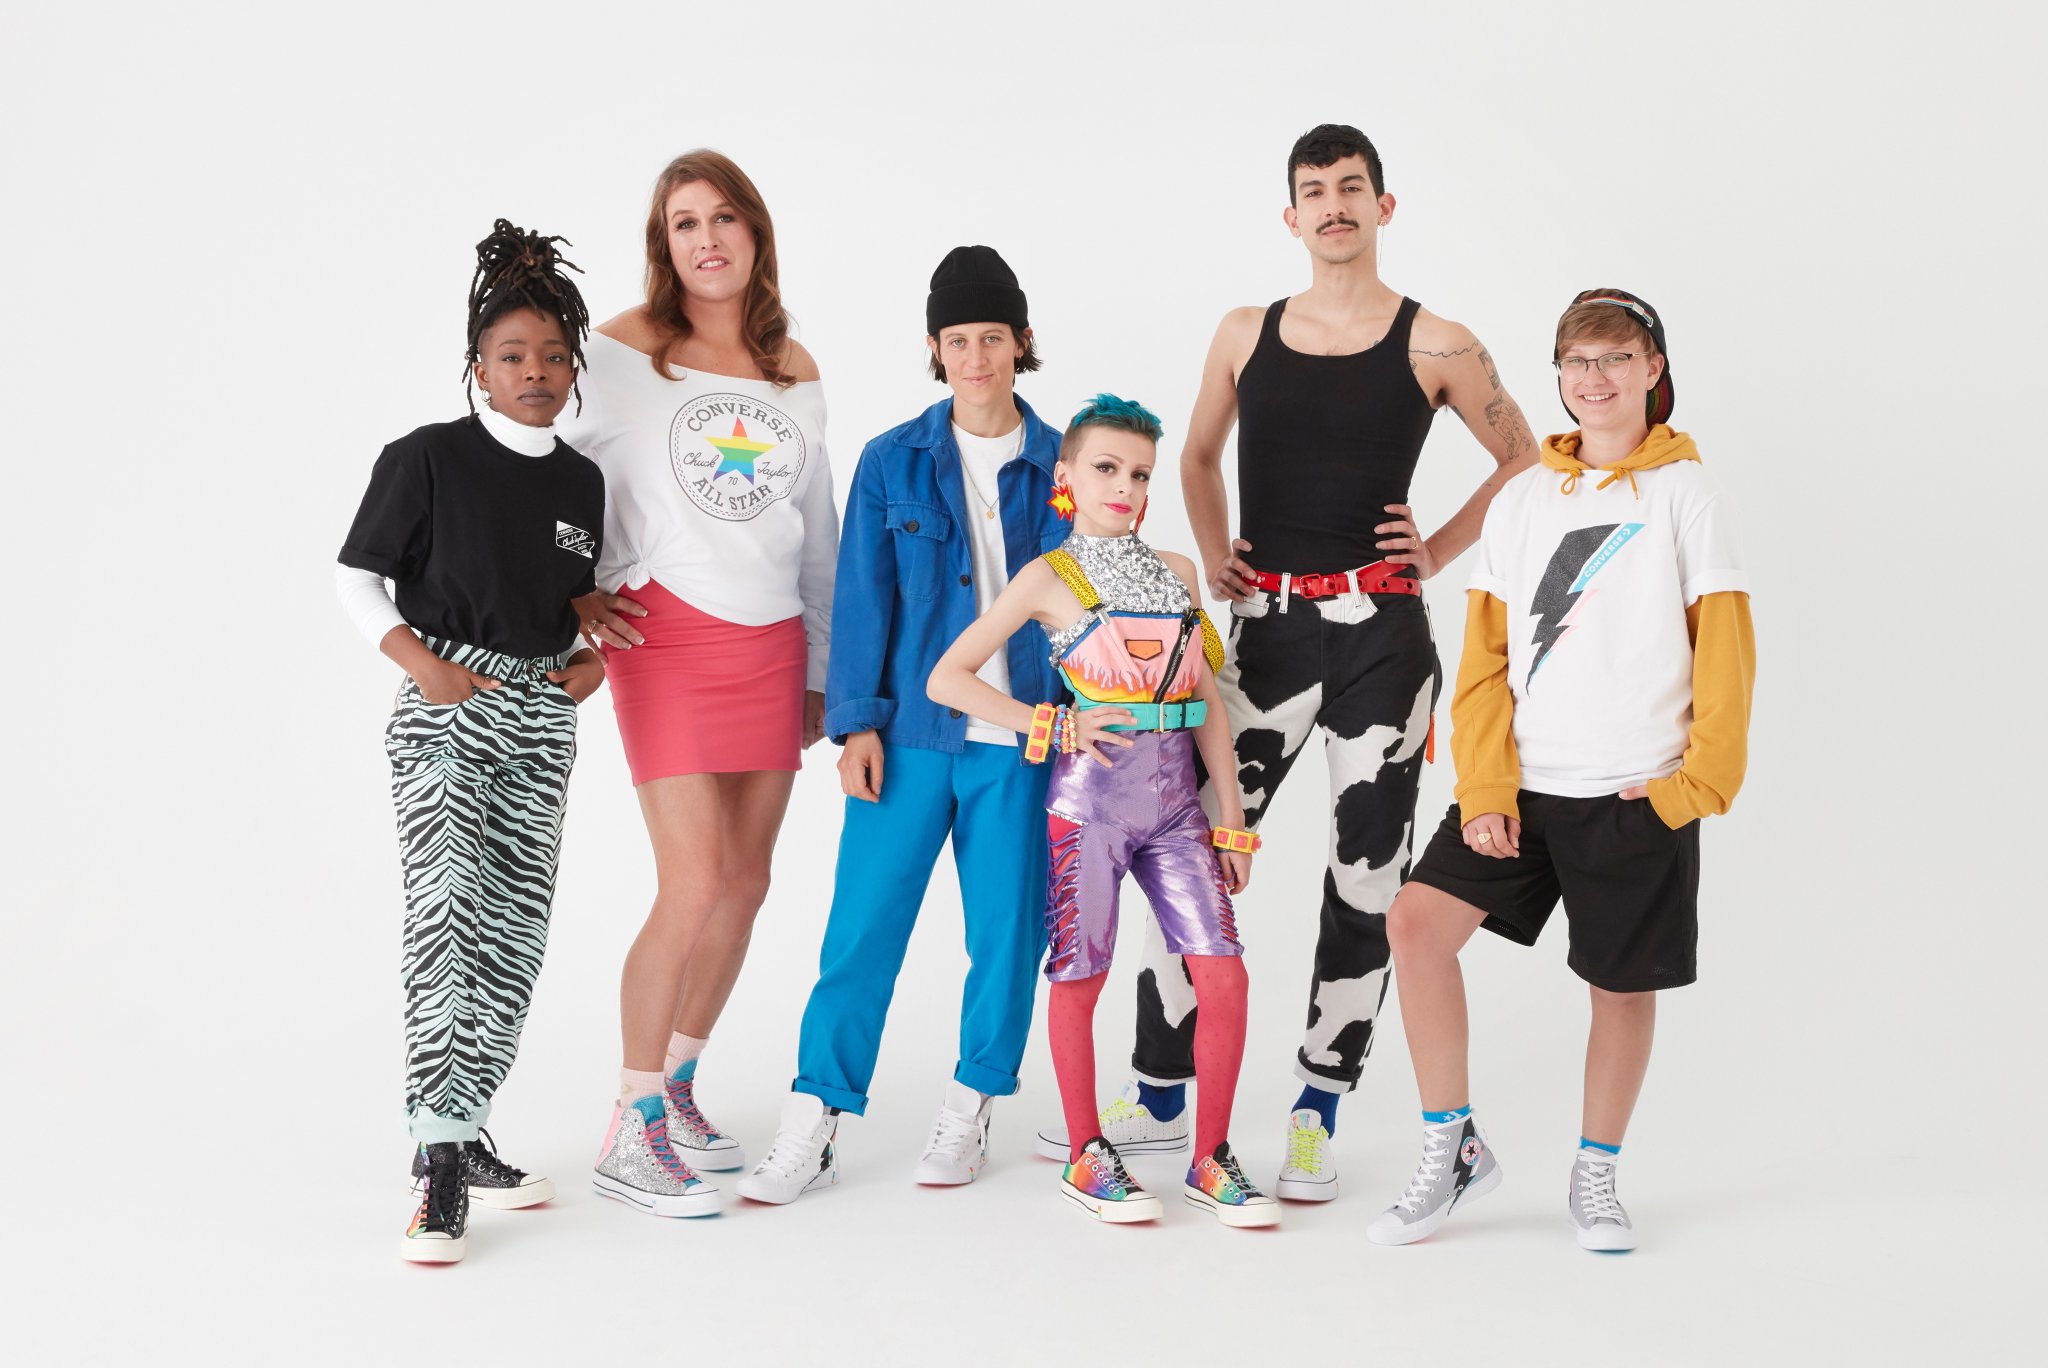 Converse on Twitter: "We're happy to launch our Pride Collection, partnering with six individuals connected to the LGBTQ+ community who show the power of expressing one's true self. Contributions are supporting @ItGetsBetter @OutMetroWest & @FenwayHealth.  https://t.co/N7VTHLhf98… https://t.co/MfzJIMD4Ey"